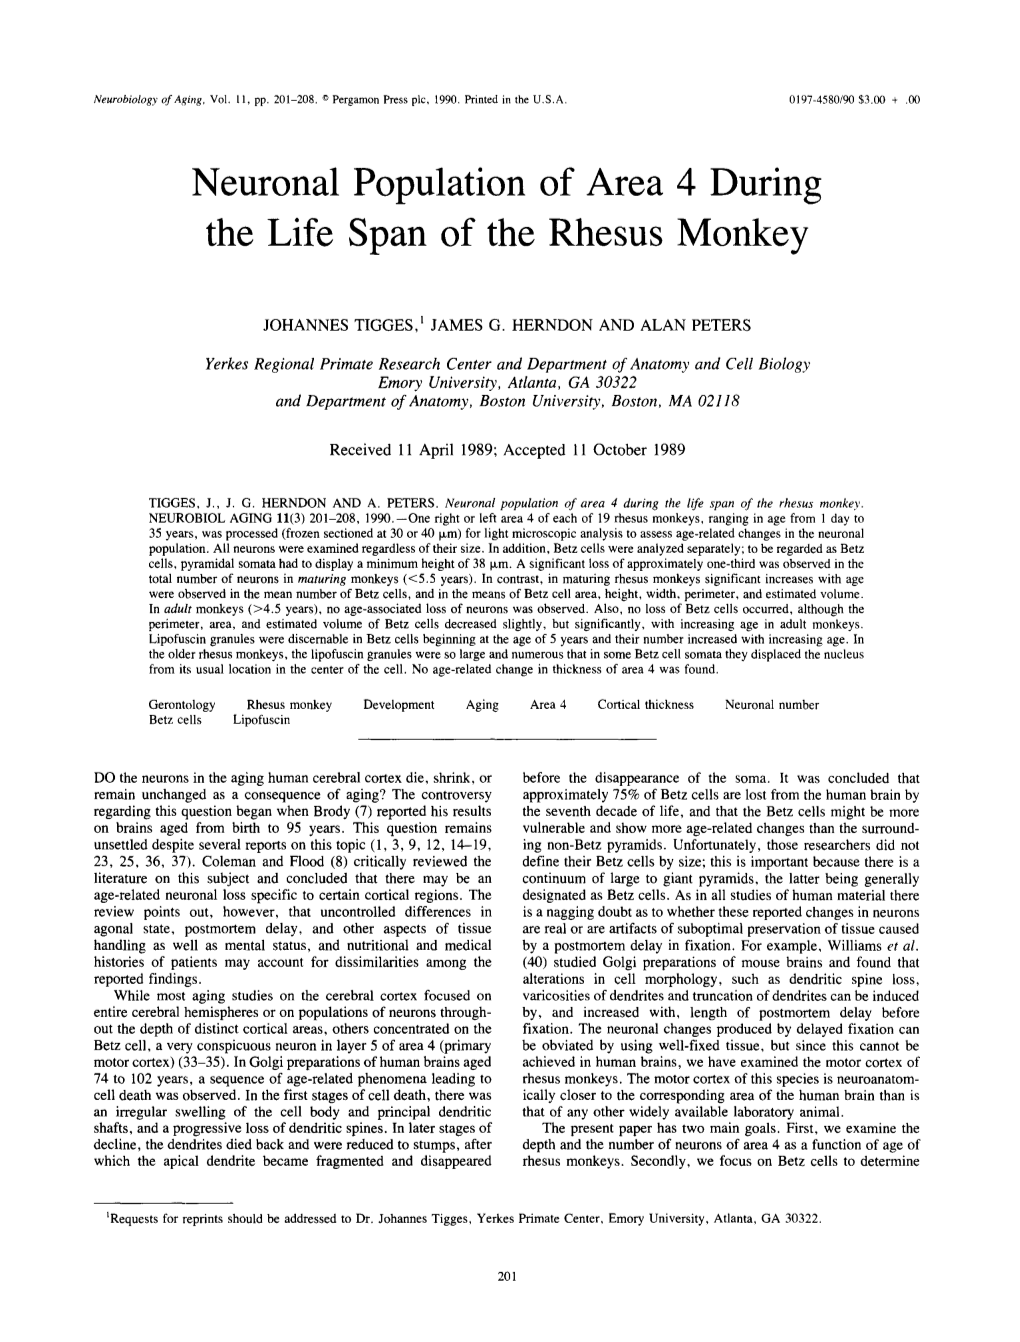 Neuronal Population of Area 4 During the Life Span of the Rhesus Monkey